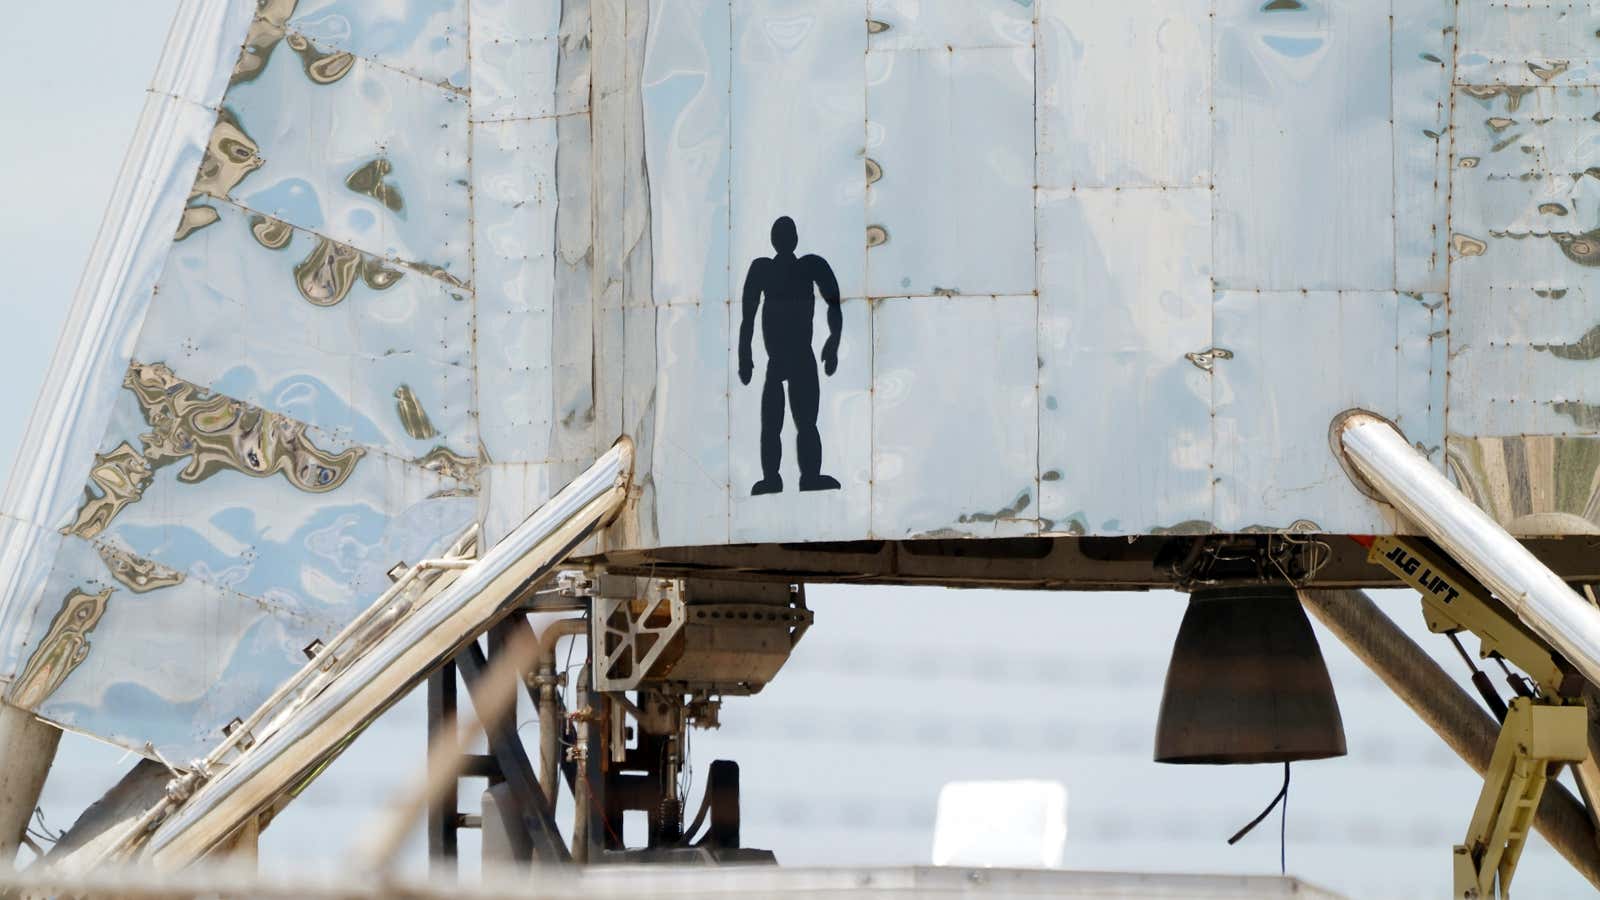 The SpaceX Starhopper is ready for another test. Are nearby residents?